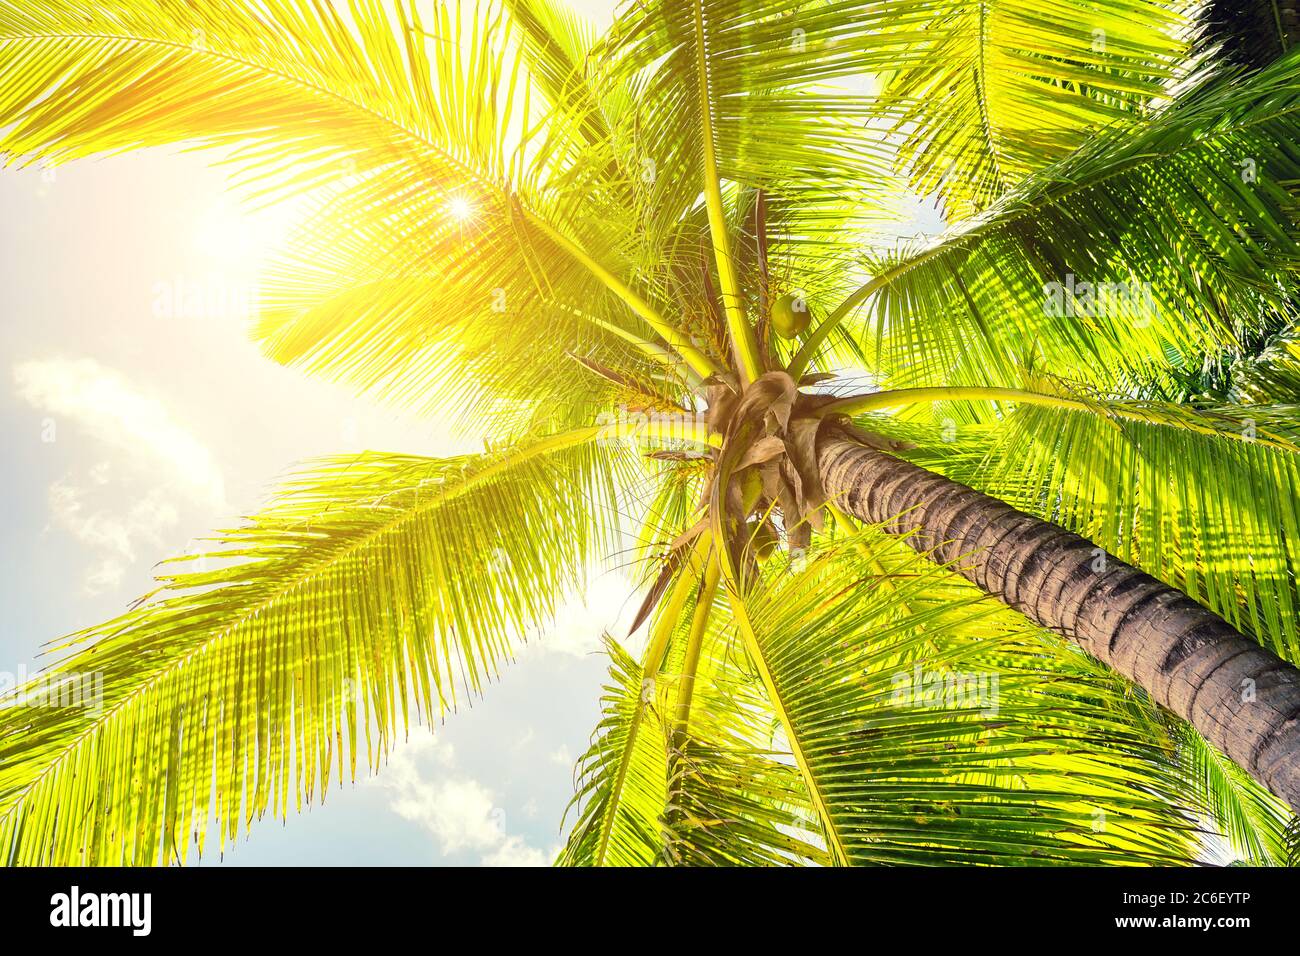 Tropical coconut palm trees with sun on sunset sky. Palm trees against blue sky and cloud abstract background with vintage tone filter effect color st Stock Photo